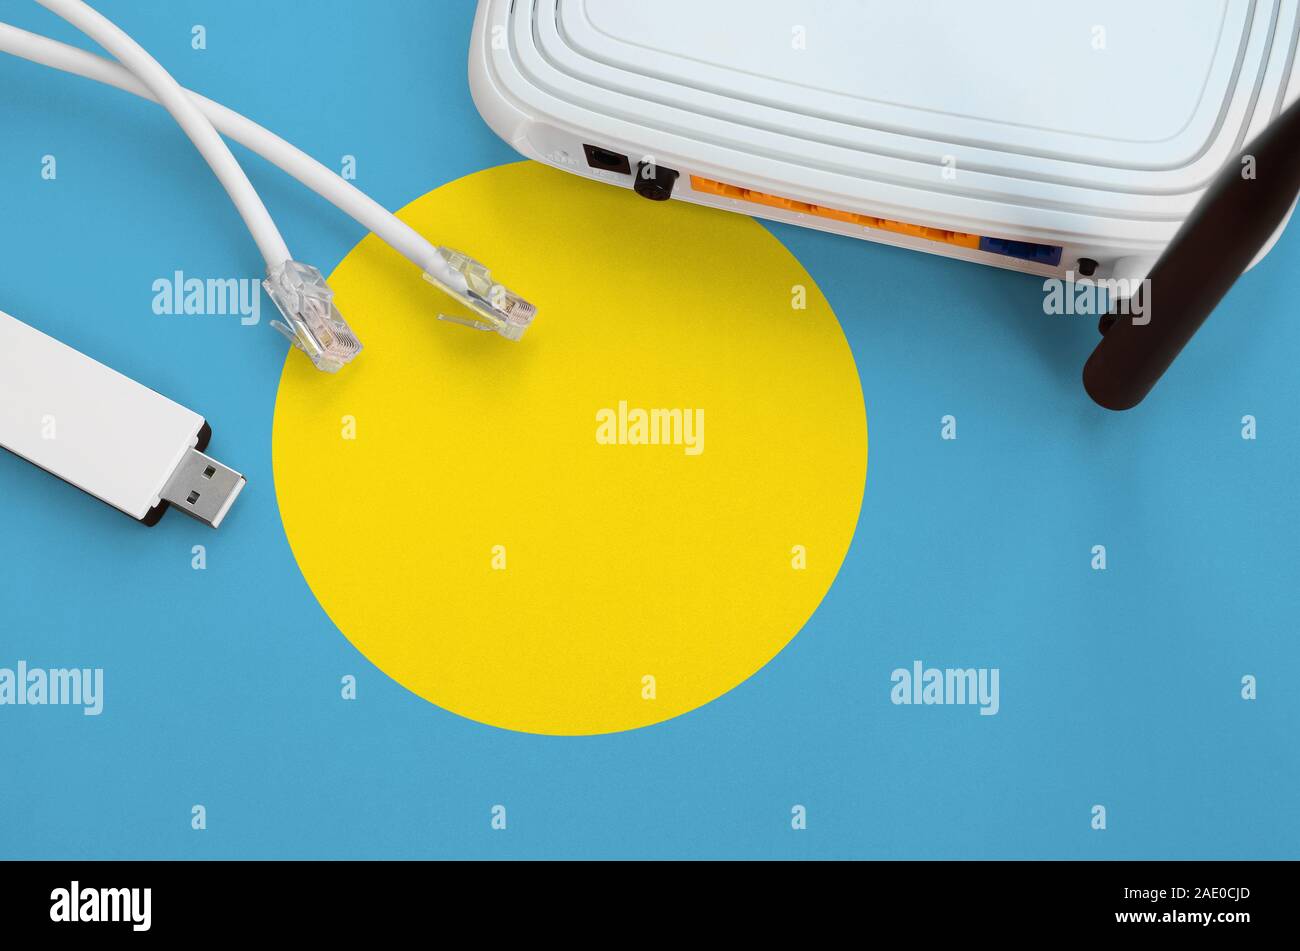 Palau flag depicted on table with internet rj45 cable, wireless usb wi-fi  adapter and router. Internet connection concept Stock Photo - Alamy